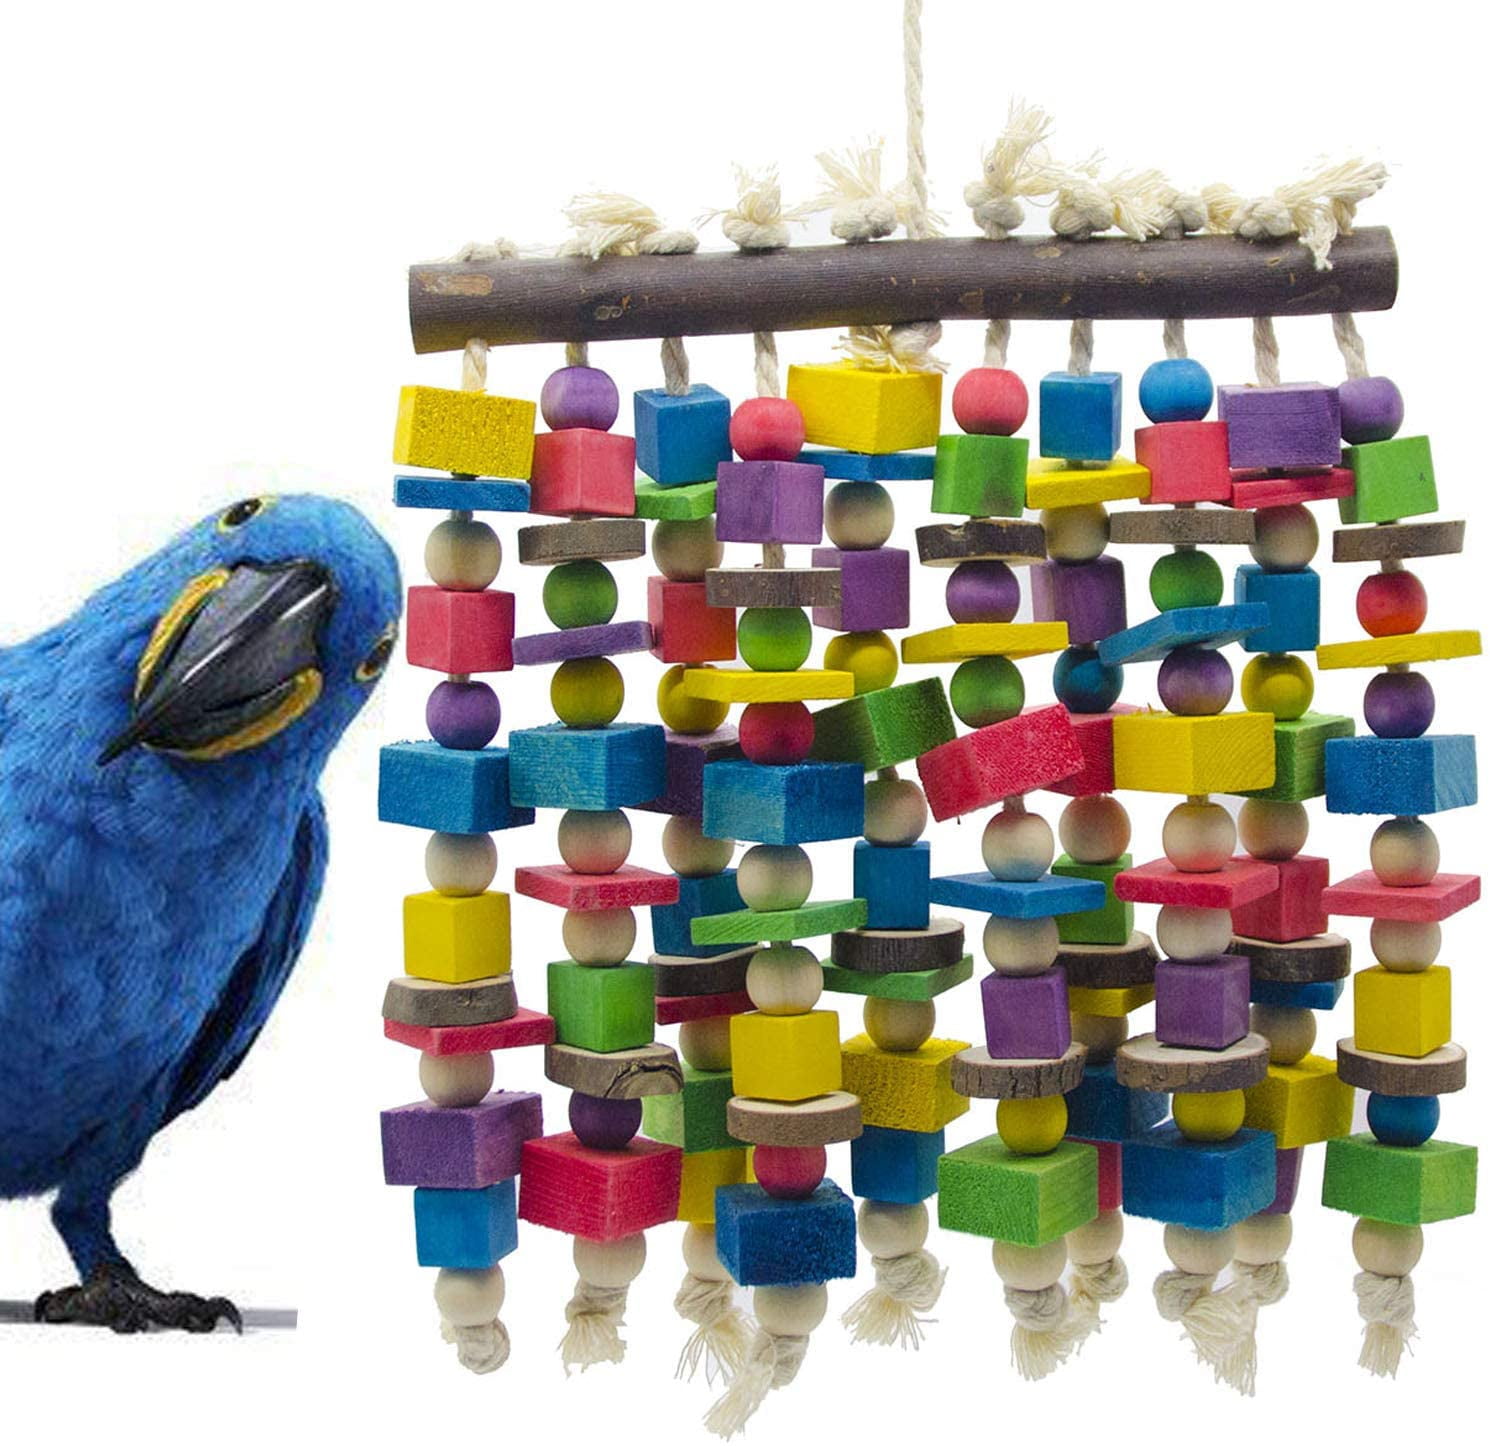 X-Large Bird Parrot Toys Swing Chewing Playground Gym Macaw Cockatoos Birds Bead